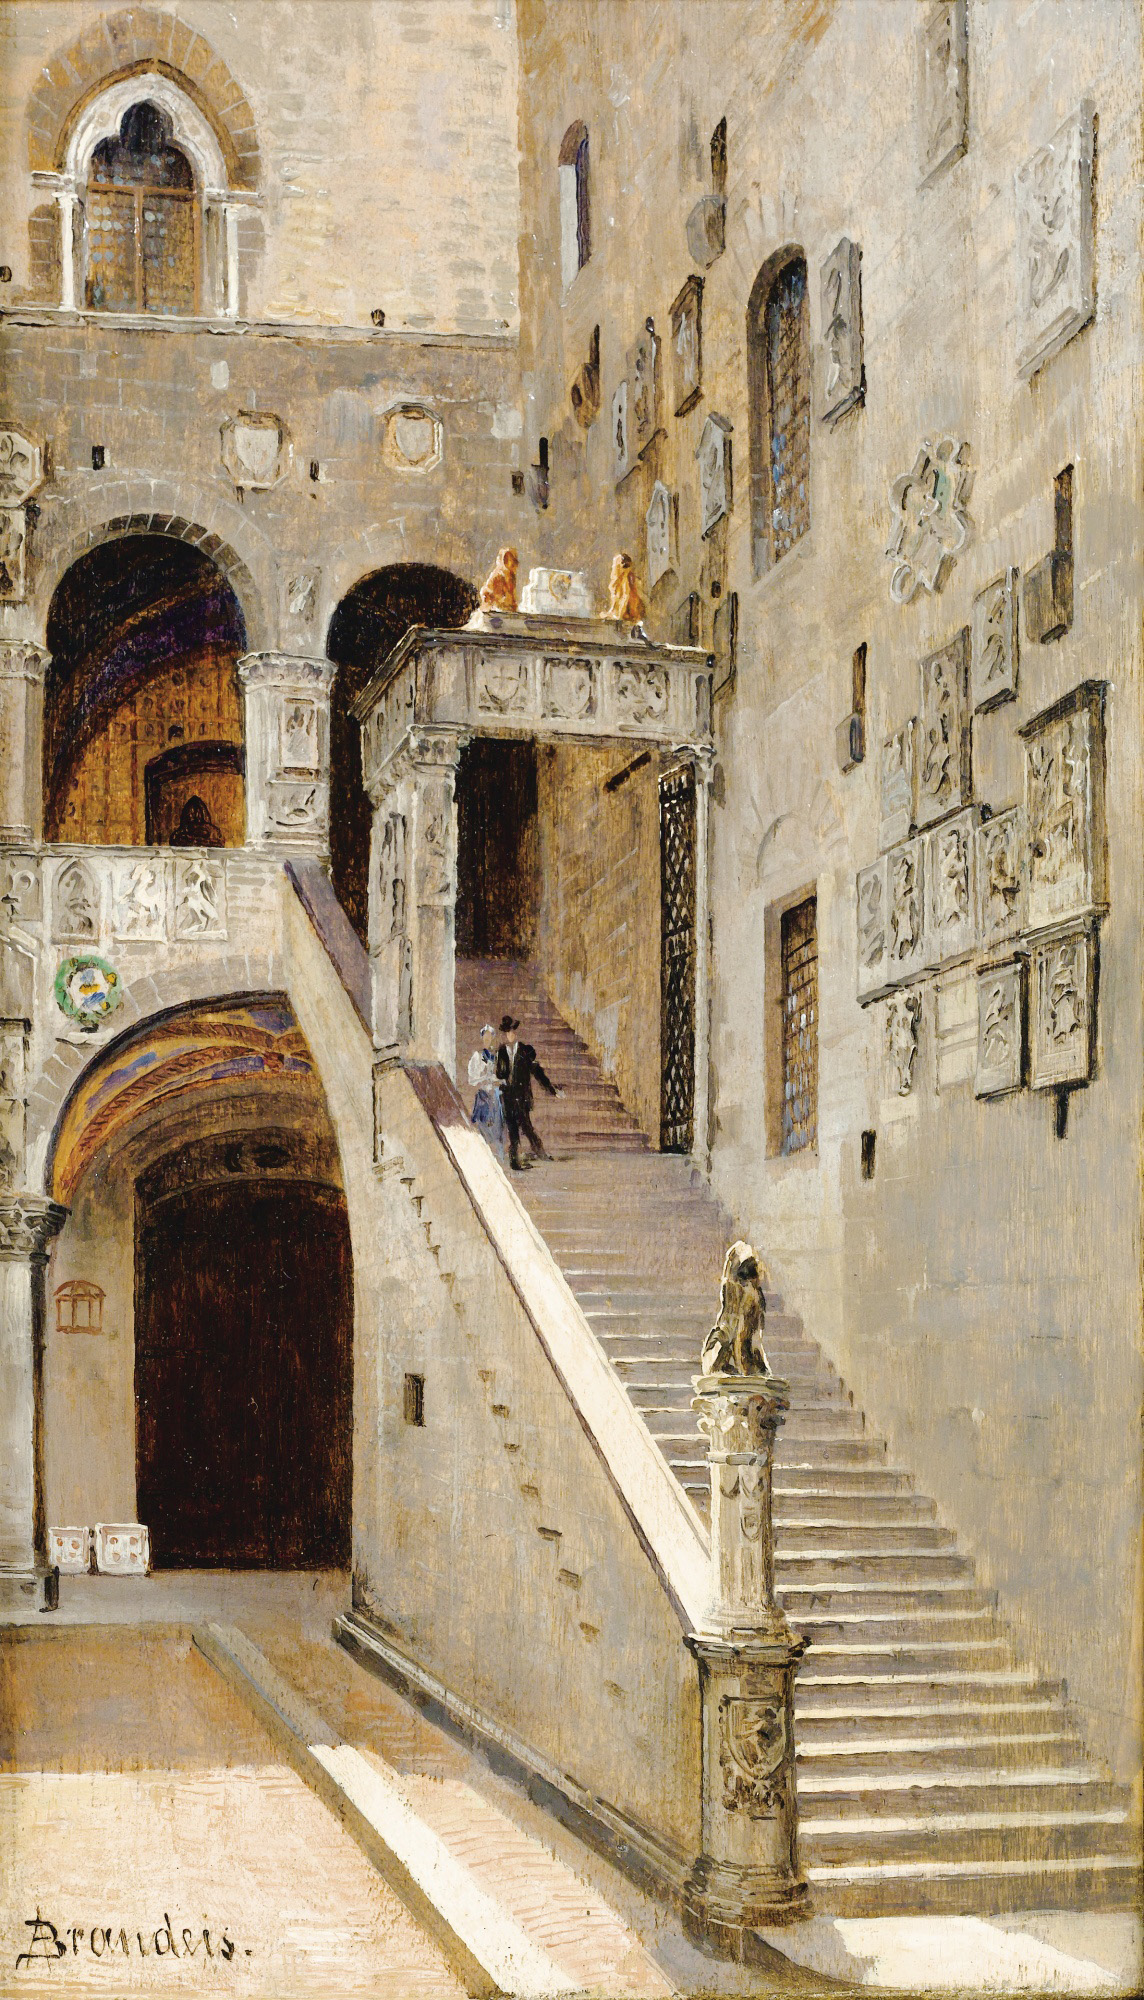 staircase in the inside yard of palazzo vecchio in florence